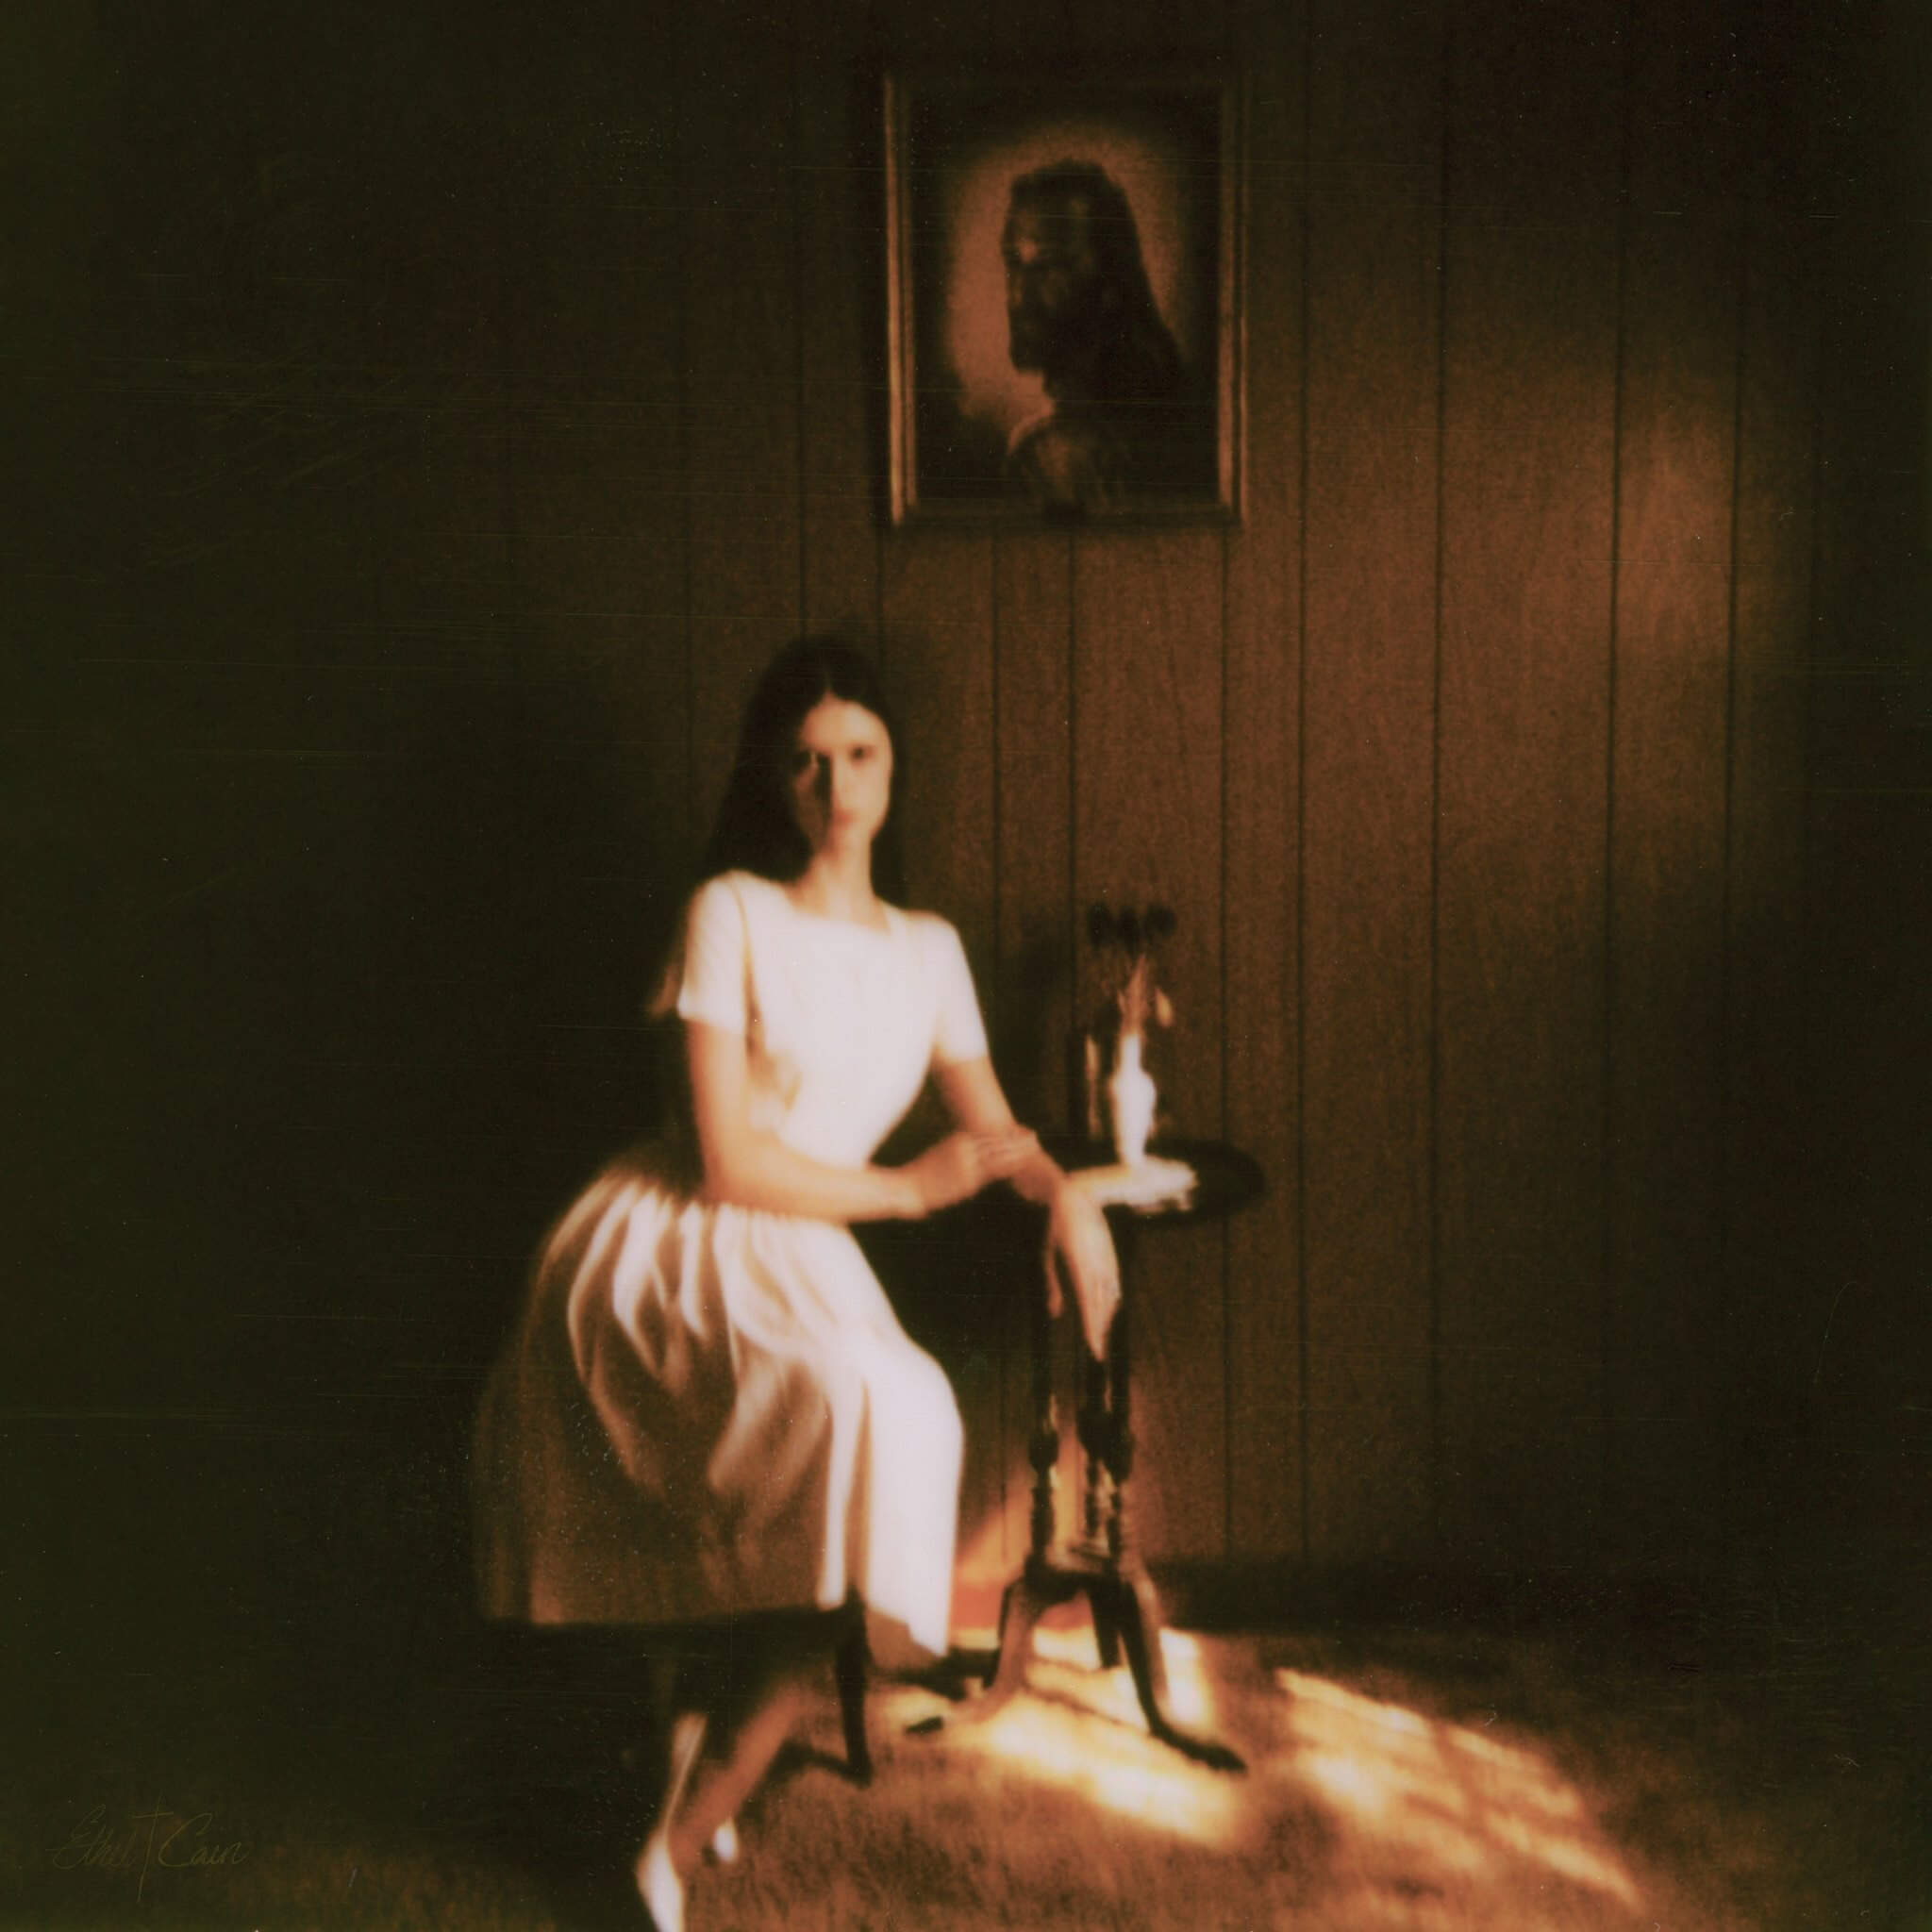 Preacher's Daughter by Ethel Cain Album Review by Sam Franzini for Northern Transmissions